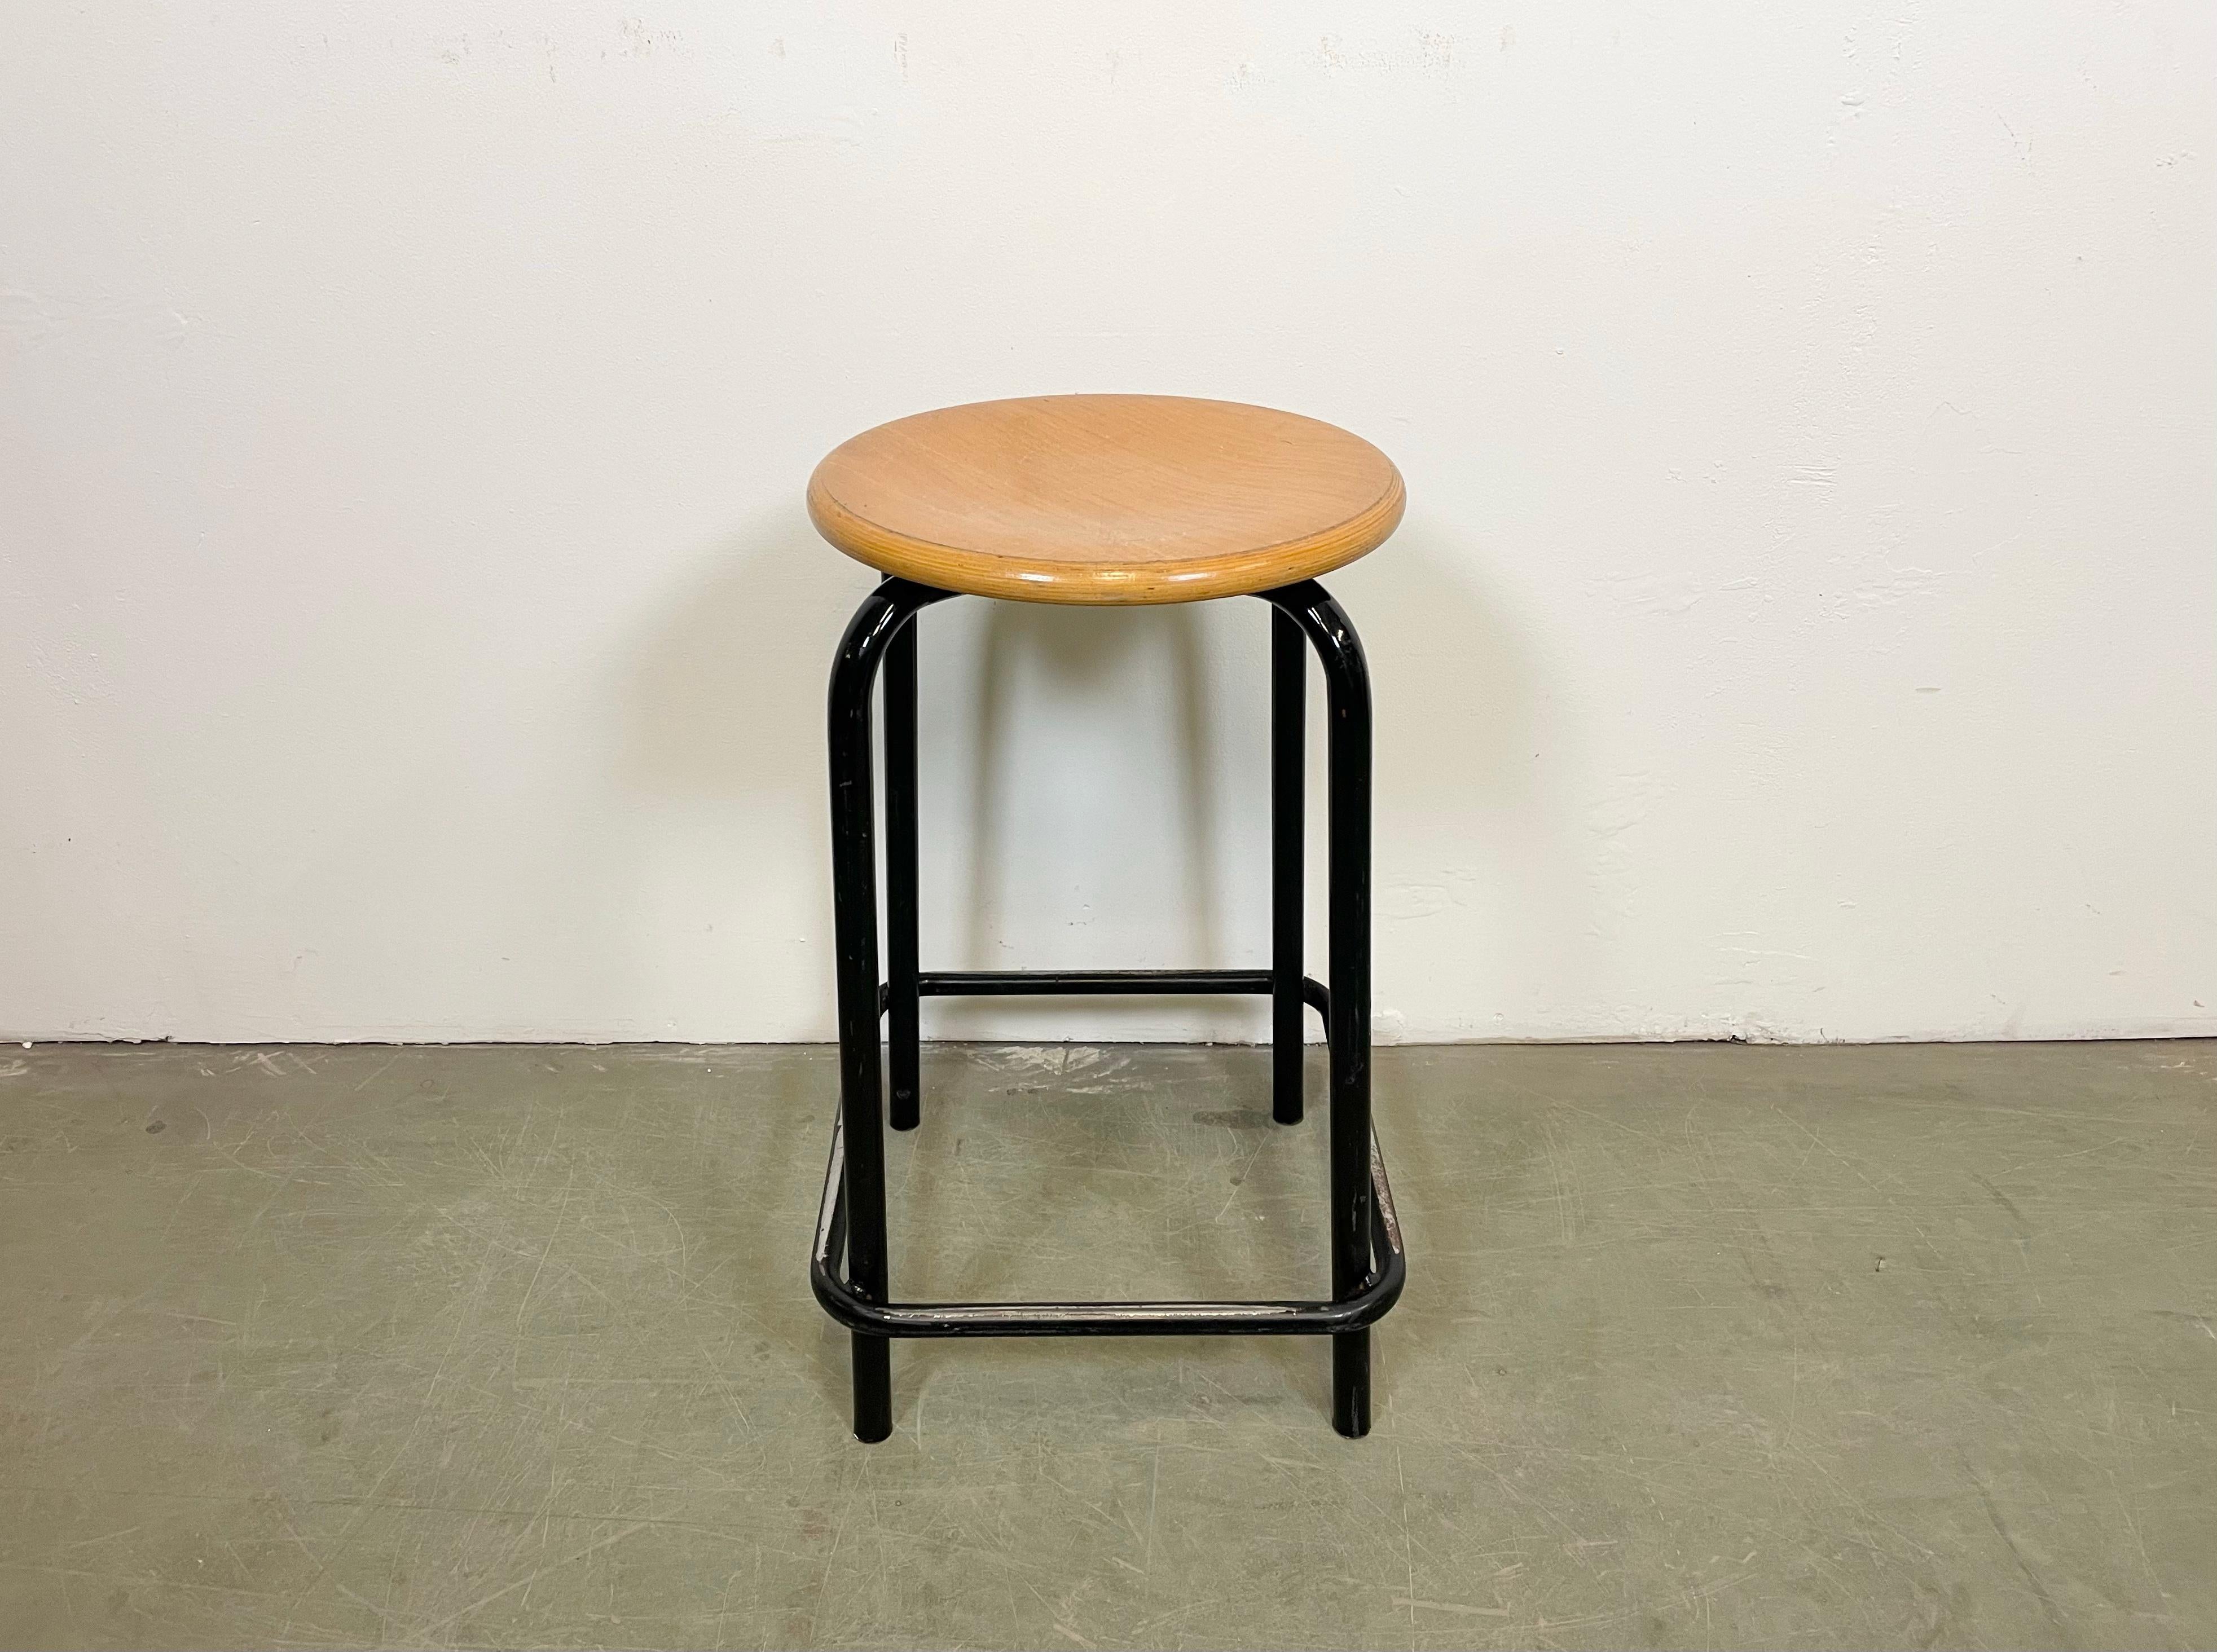 Lacquered Vintage Industrial Italian Stool, 1970s For Sale